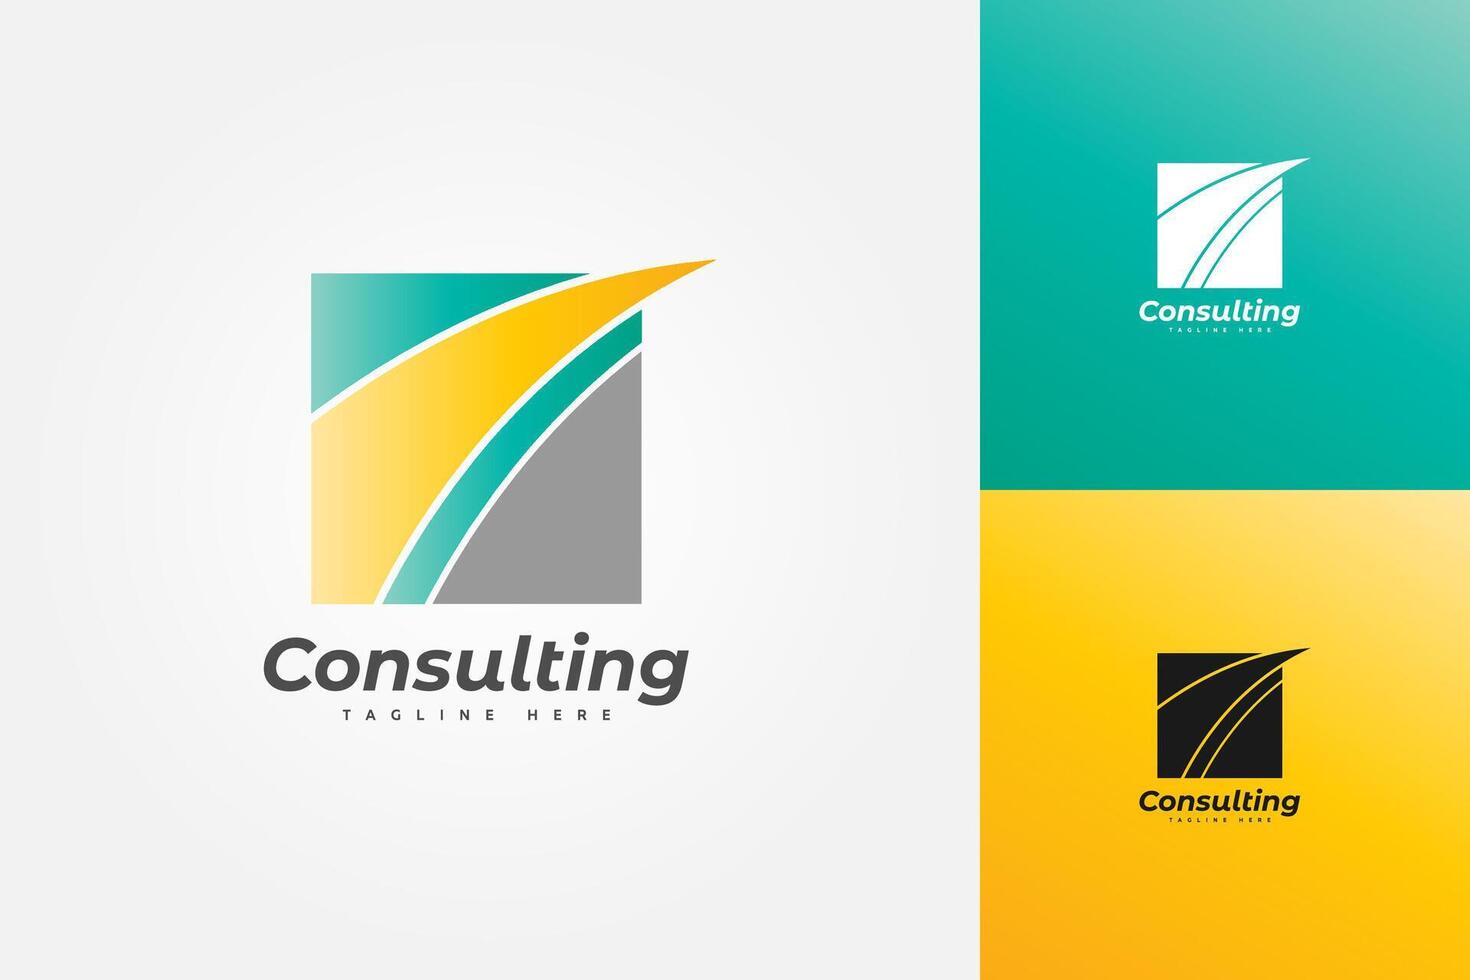 inspiration for business consulting logos or solutions vector